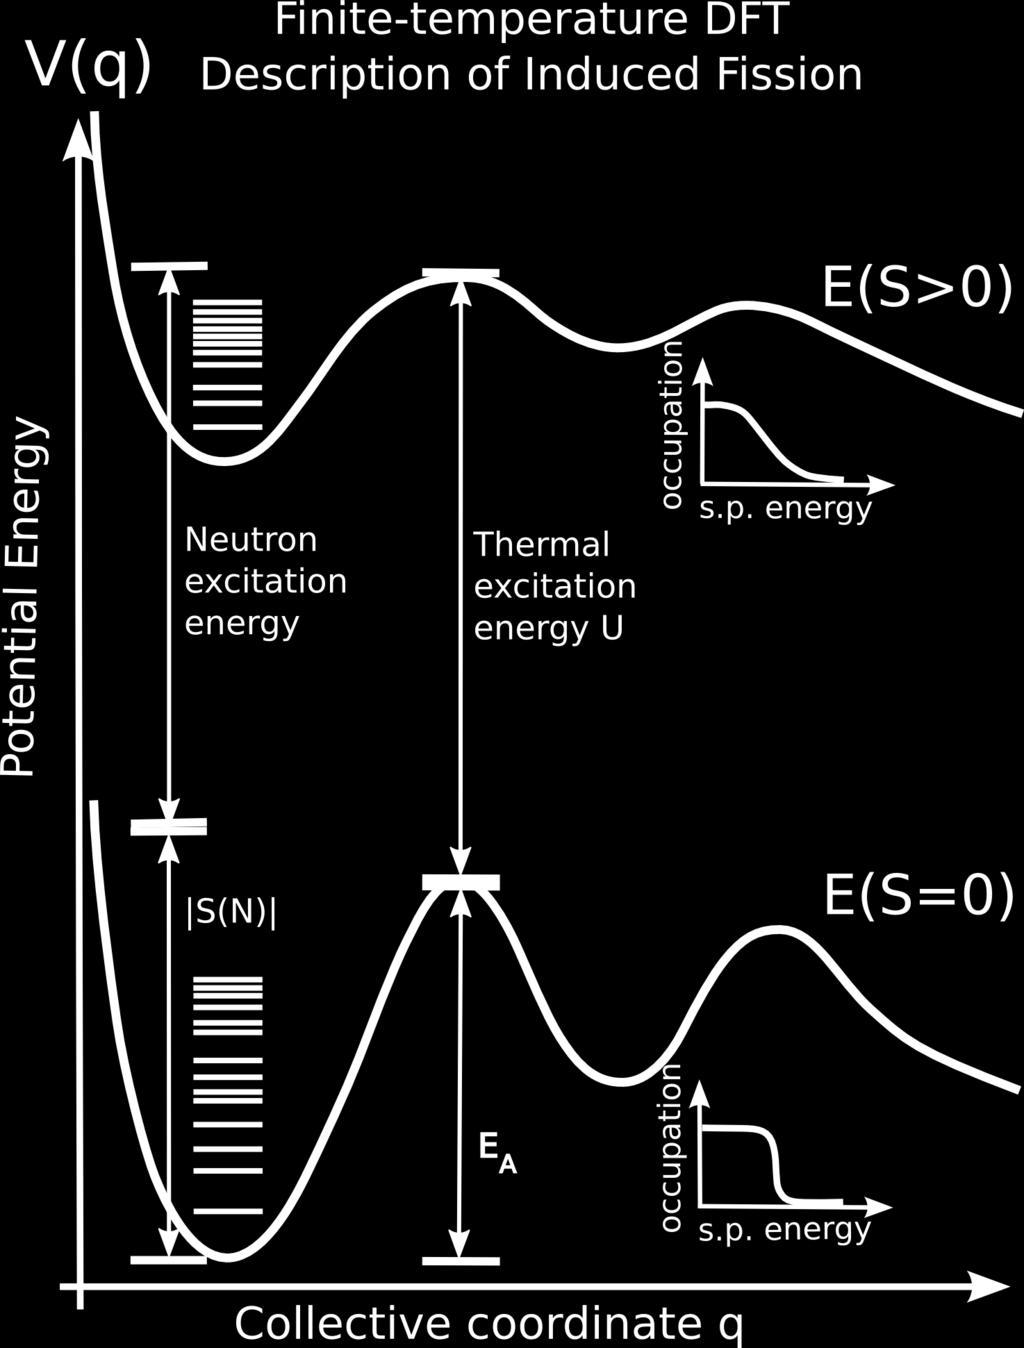 Dealing with Excitation Energy Question: how to describe highly-excited compound nucleus?